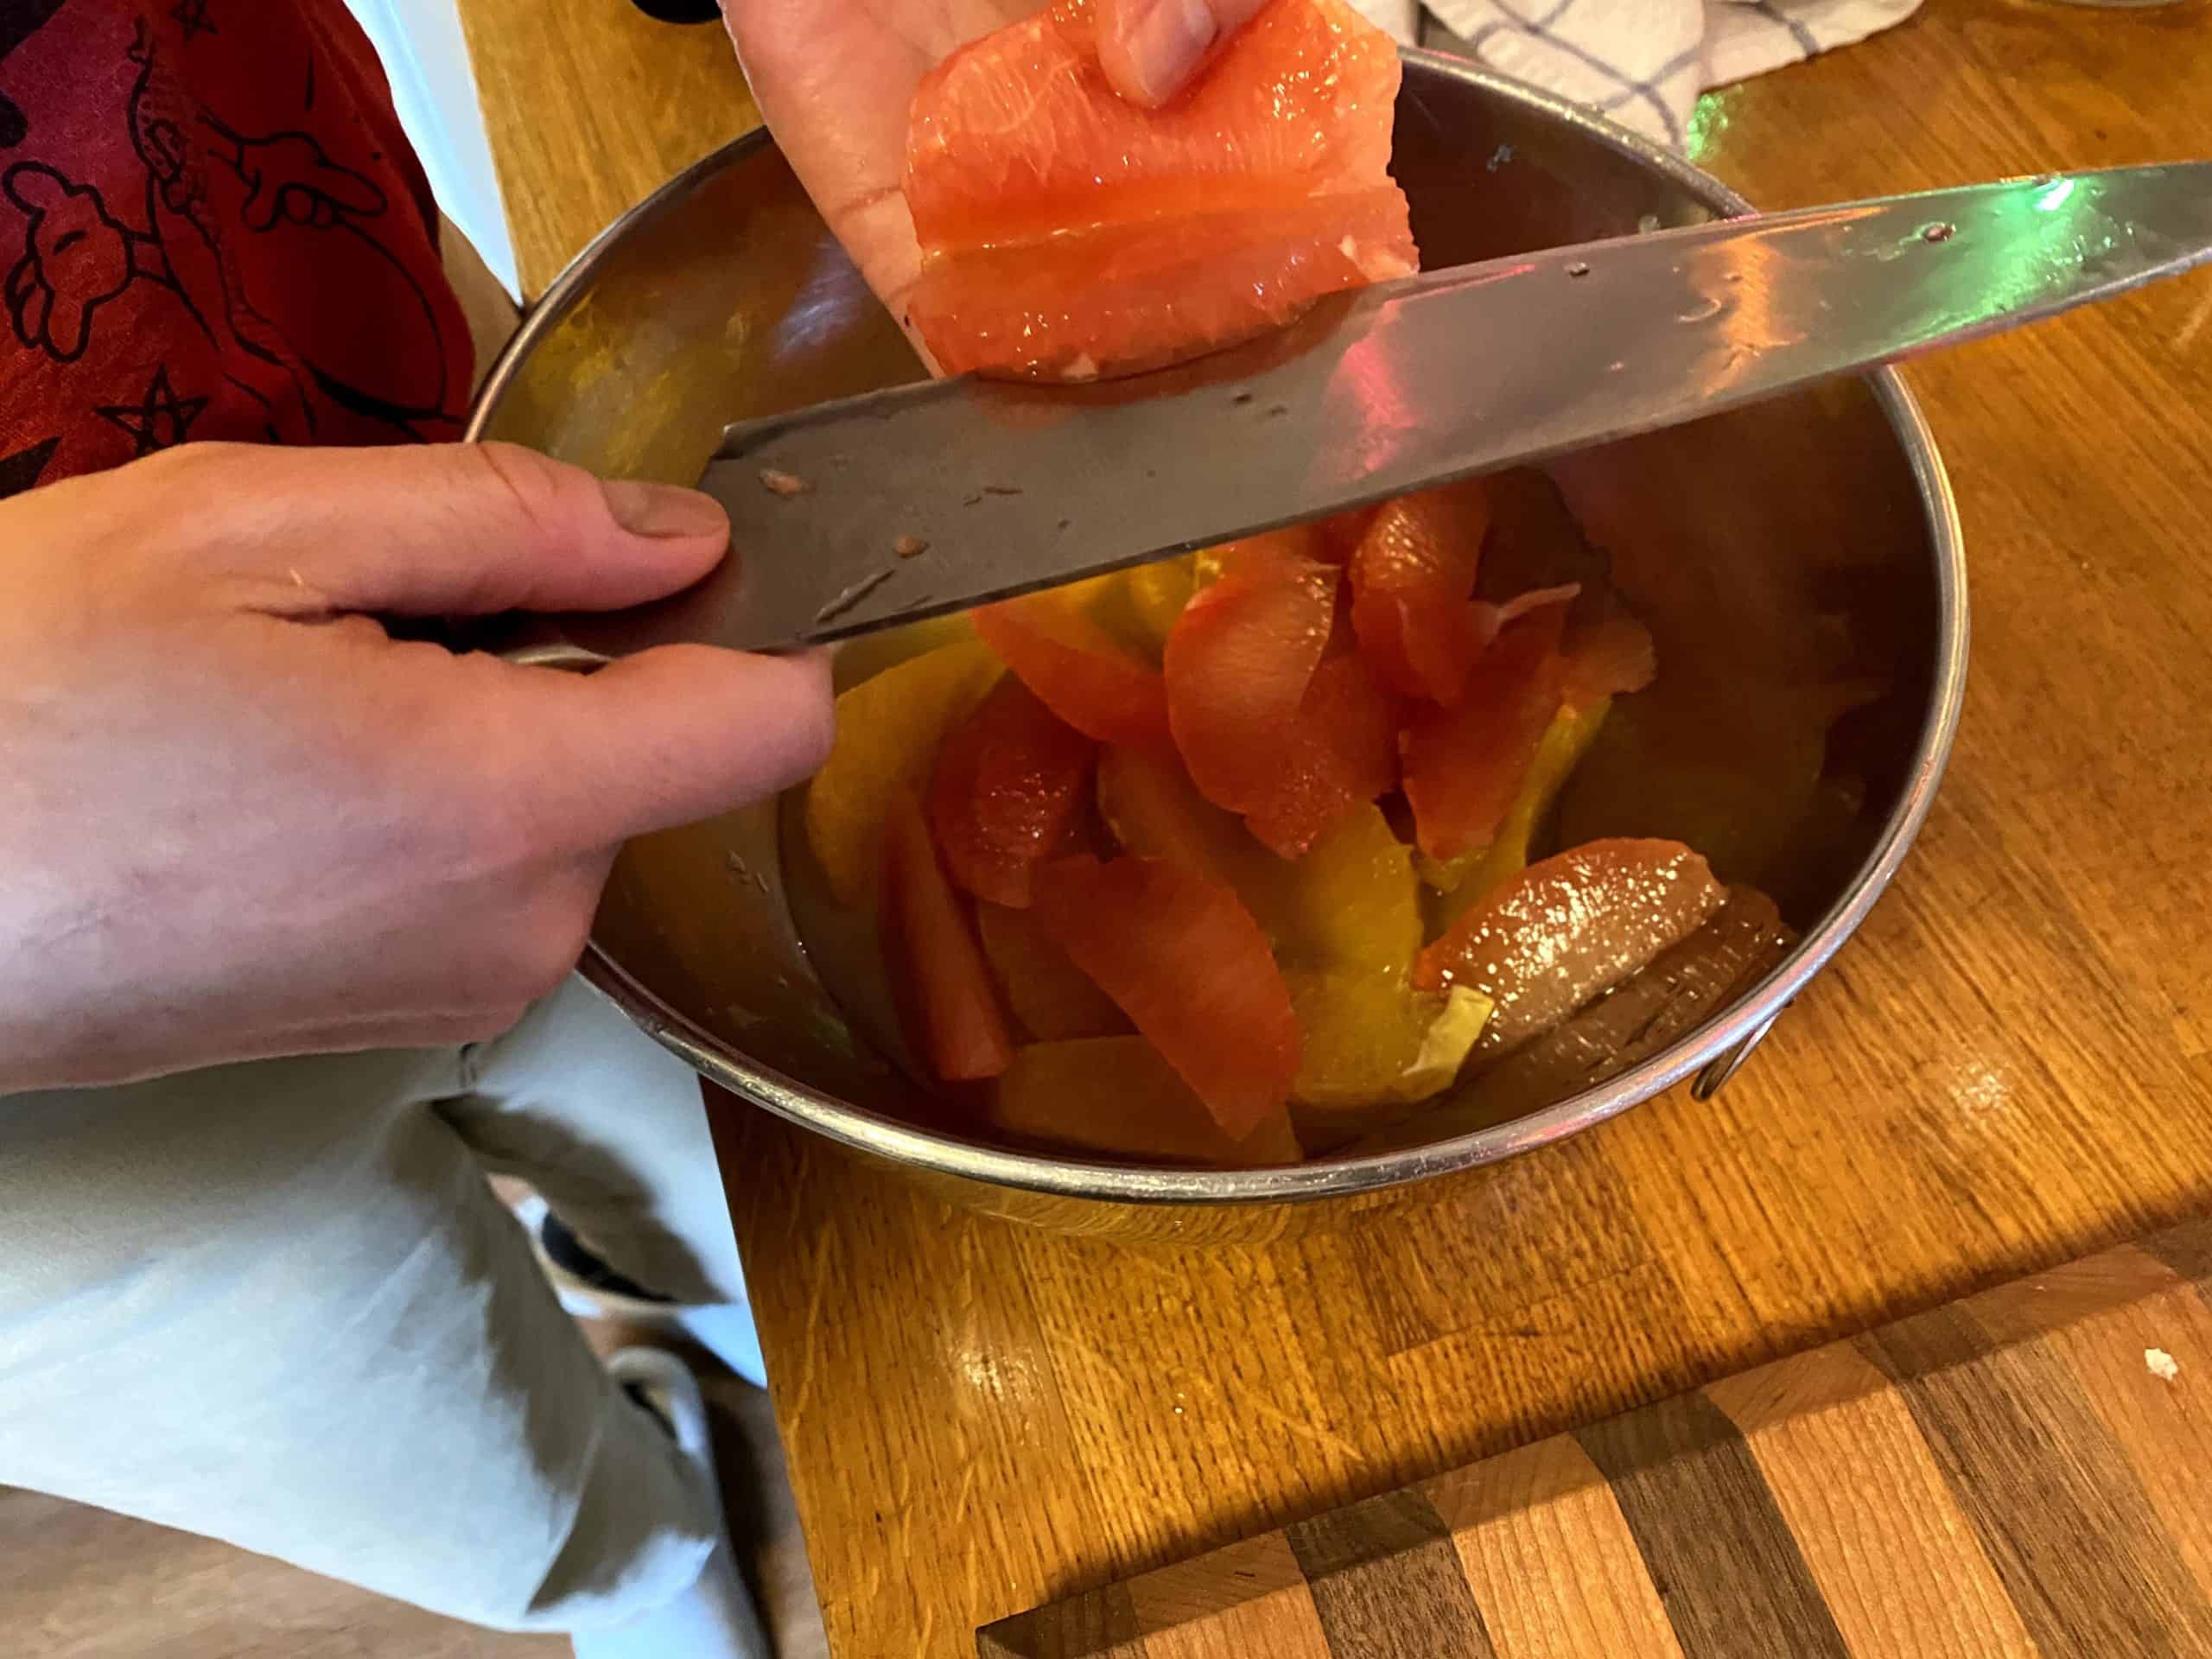 Supremeing pink grapefruit with a knife.